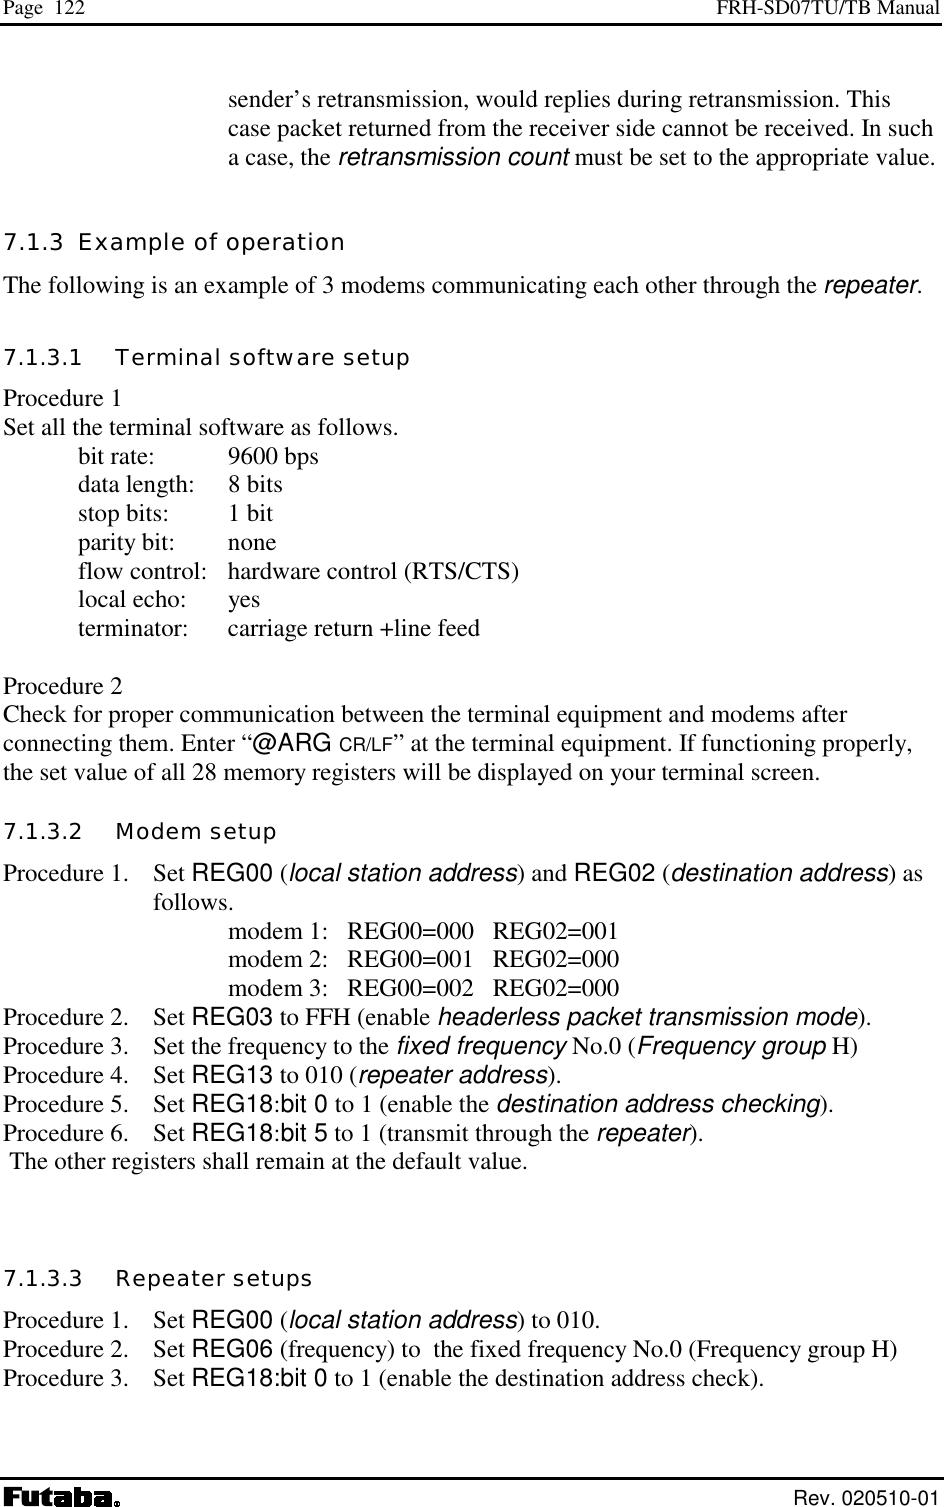 Page  122  FRH-SD07TU/TB Manual  Rev. 020510-01 sender’s retransmission, would replies during retransmission. This case packet returned from the receiver side cannot be received. In such a case, the retransmission count must be set to the appropriate value. 7.1.3  Example of operation The following is an example of 3 modems communicating each other through the repeater. 7.1.3.1   Terminal software setup Procedure 1 Set all the terminal software as follows.    bit rate:  9600 bps   data length:  8 bits   stop bits:  1 bit  parity bit: none   flow control:   hardware control (RTS/CTS)    local echo:  yes    terminator:  carriage return +line feed  Procedure 2 Check for proper communication between the terminal equipment and modems after connecting them. Enter “@ARG CR/LF” at the terminal equipment. If functioning properly, the set value of all 28 memory registers will be displayed on your terminal screen. 7.1.3.2   Modem setup Procedure 1.  Set REG00 (local station address) and REG02 (destination address) as       follows.        modem 1:   REG00=000   REG02=001        modem 2:   REG00=001   REG02=000        modem 3:   REG00=002   REG02=000 Procedure 2.  Set REG03 to FFH (enable headerless packet transmission mode). Procedure 3.  Set the frequency to the fixed frequency No.0 (Frequency group H) Procedure 4.  Set REG13 to 010 (repeater address). Procedure 5.  Set REG18:bit 0 to 1 (enable the destination address checking). Procedure 6.  Set REG18:bit 5 to 1 (transmit through the repeater).  The other registers shall remain at the default value.   7.1.3.3   Repeater setups Procedure 1.  Set REG00 (local station address) to 010. Procedure 2.  Set REG06 (frequency) to  the fixed frequency No.0 (Frequency group H) Procedure 3.  Set REG18:bit 0 to 1 (enable the destination address check). 